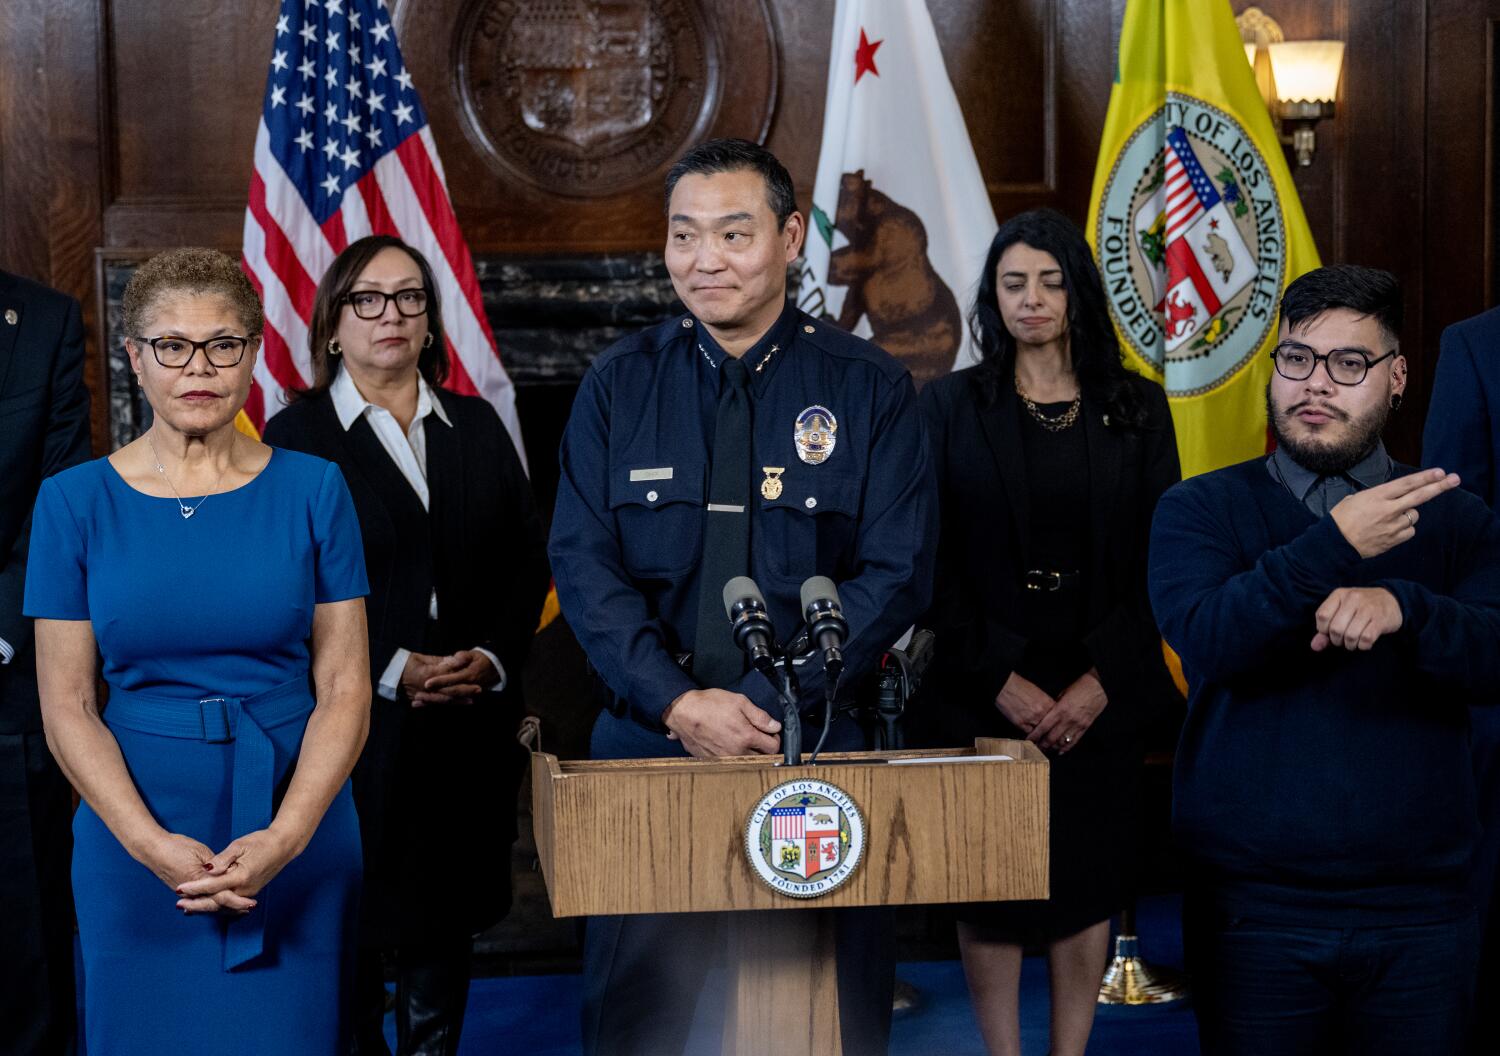 How many people applied to be LAPD chief? Details on the hiring process remain secret